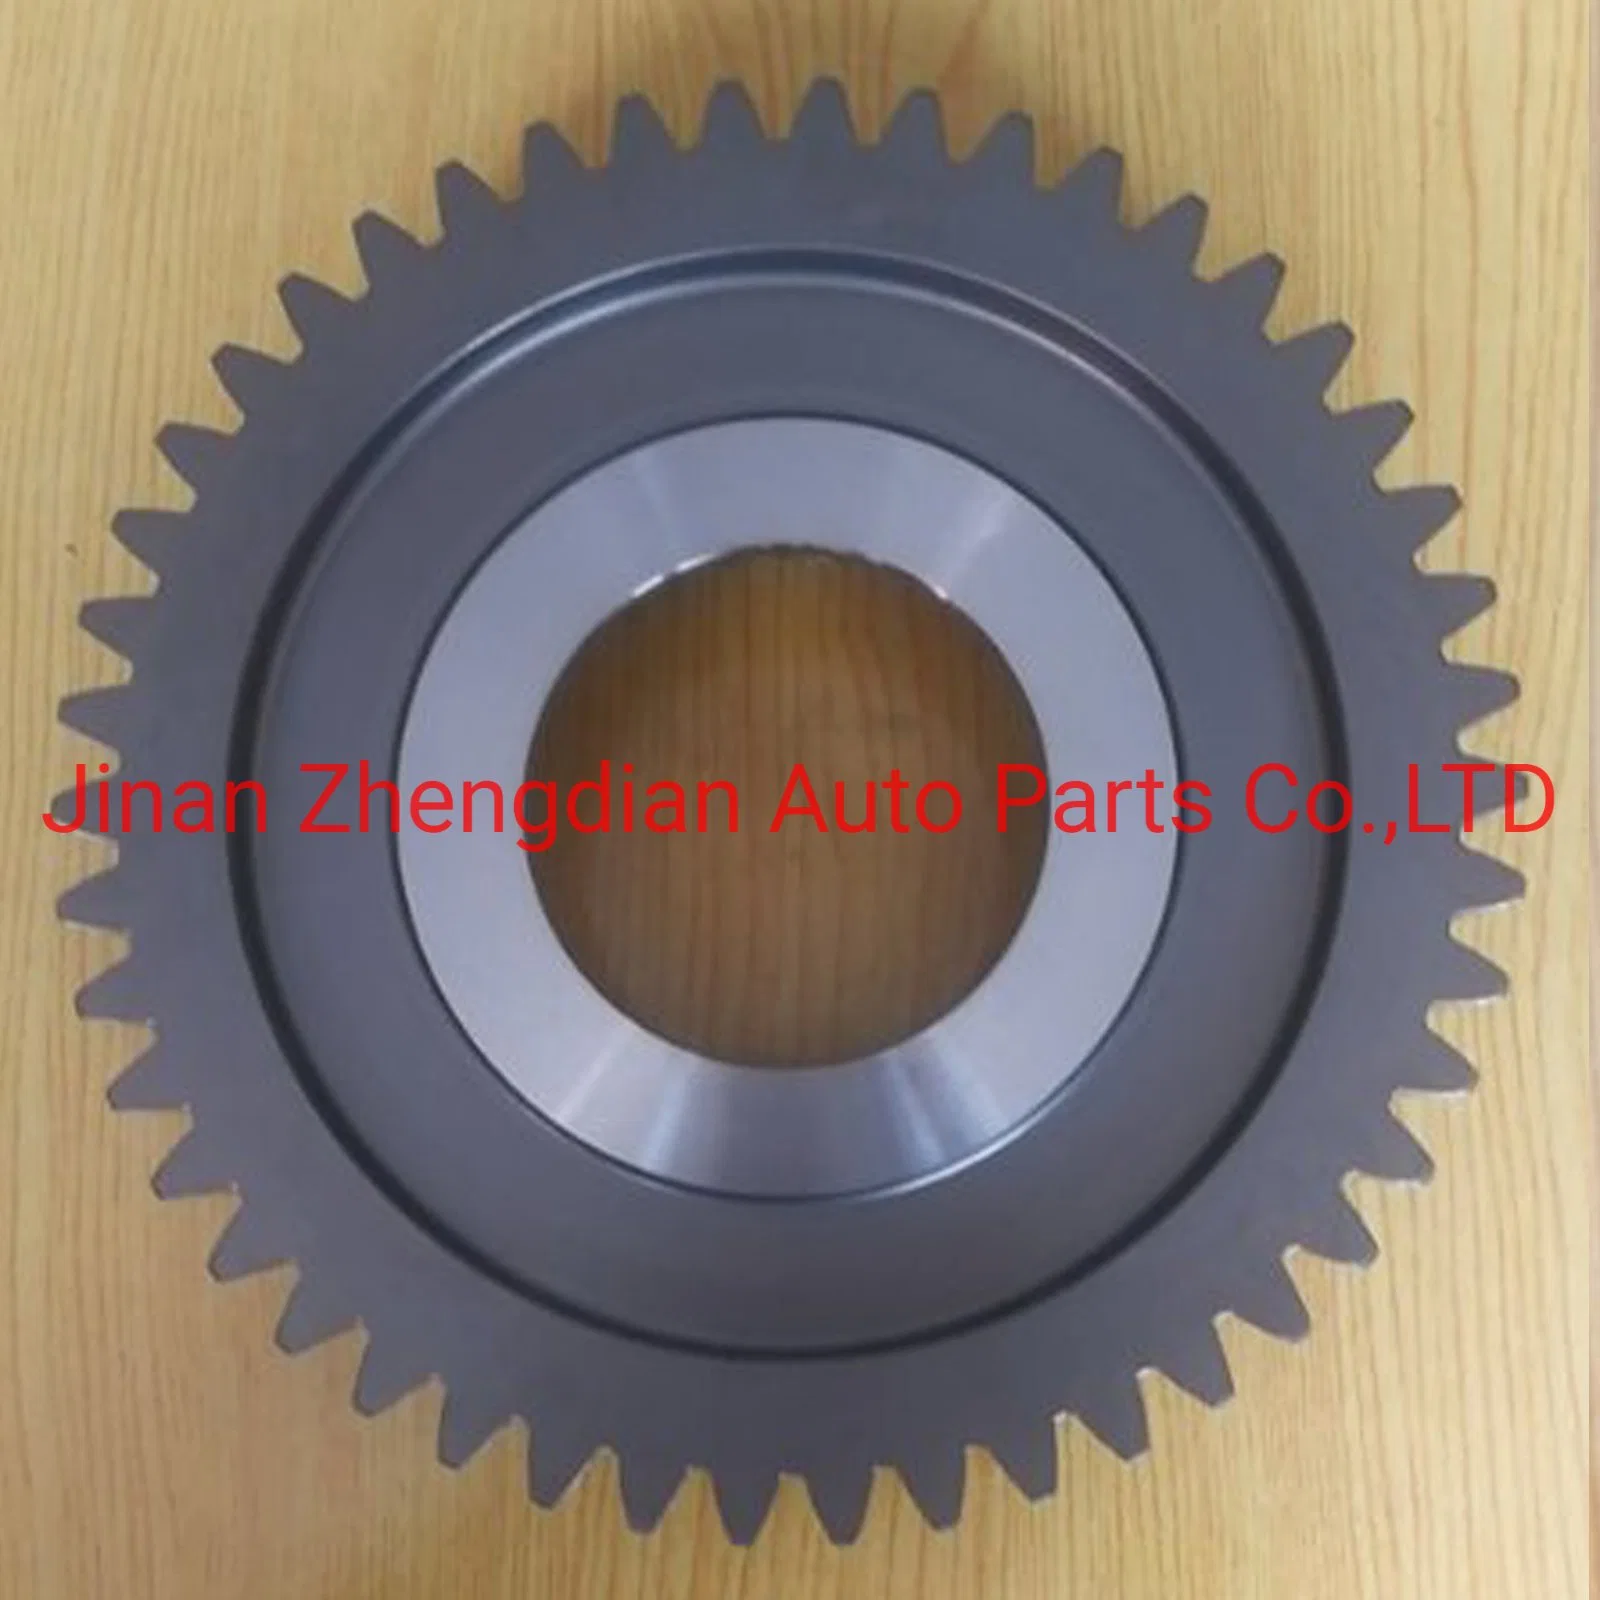 12js200t-1701051 Fast Gearbox Gear Auto Spare Parts for Beiben North Benz Sinotruk HOWO Sitrak Shacman FAW Foton Auman Hongyan Camc Dongfeng Truck